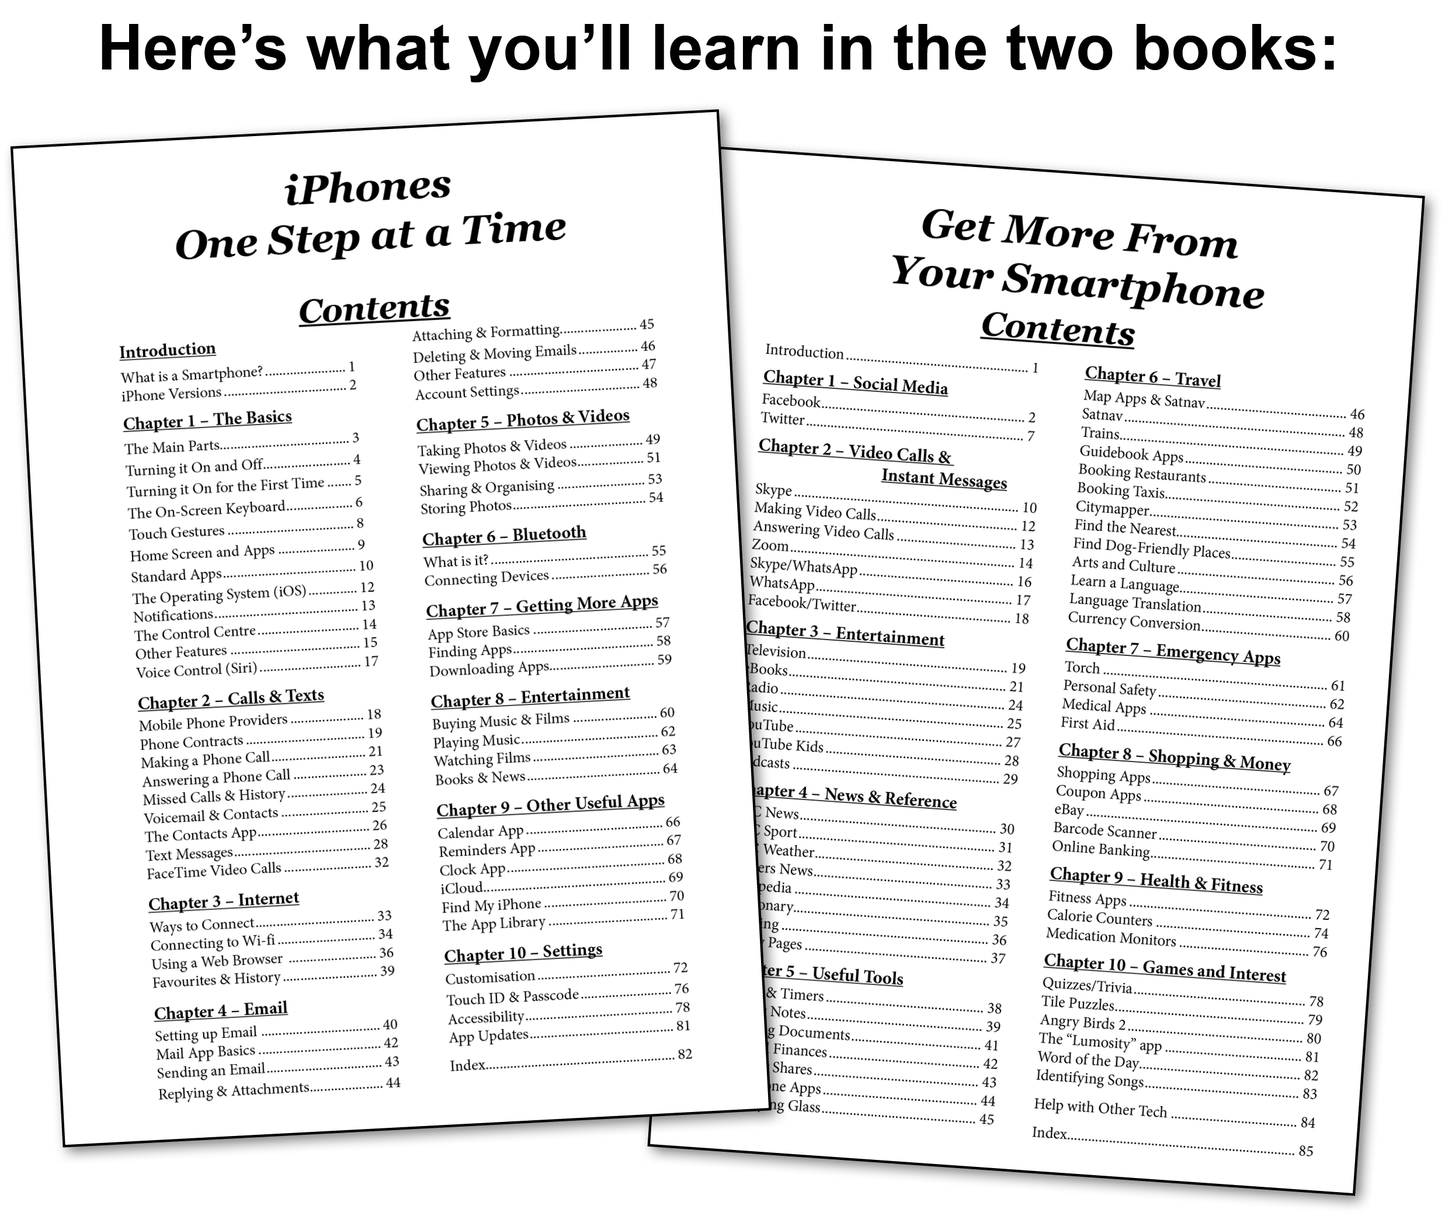 Contents pages from Get more from your smartphone and iPhones One step at a time